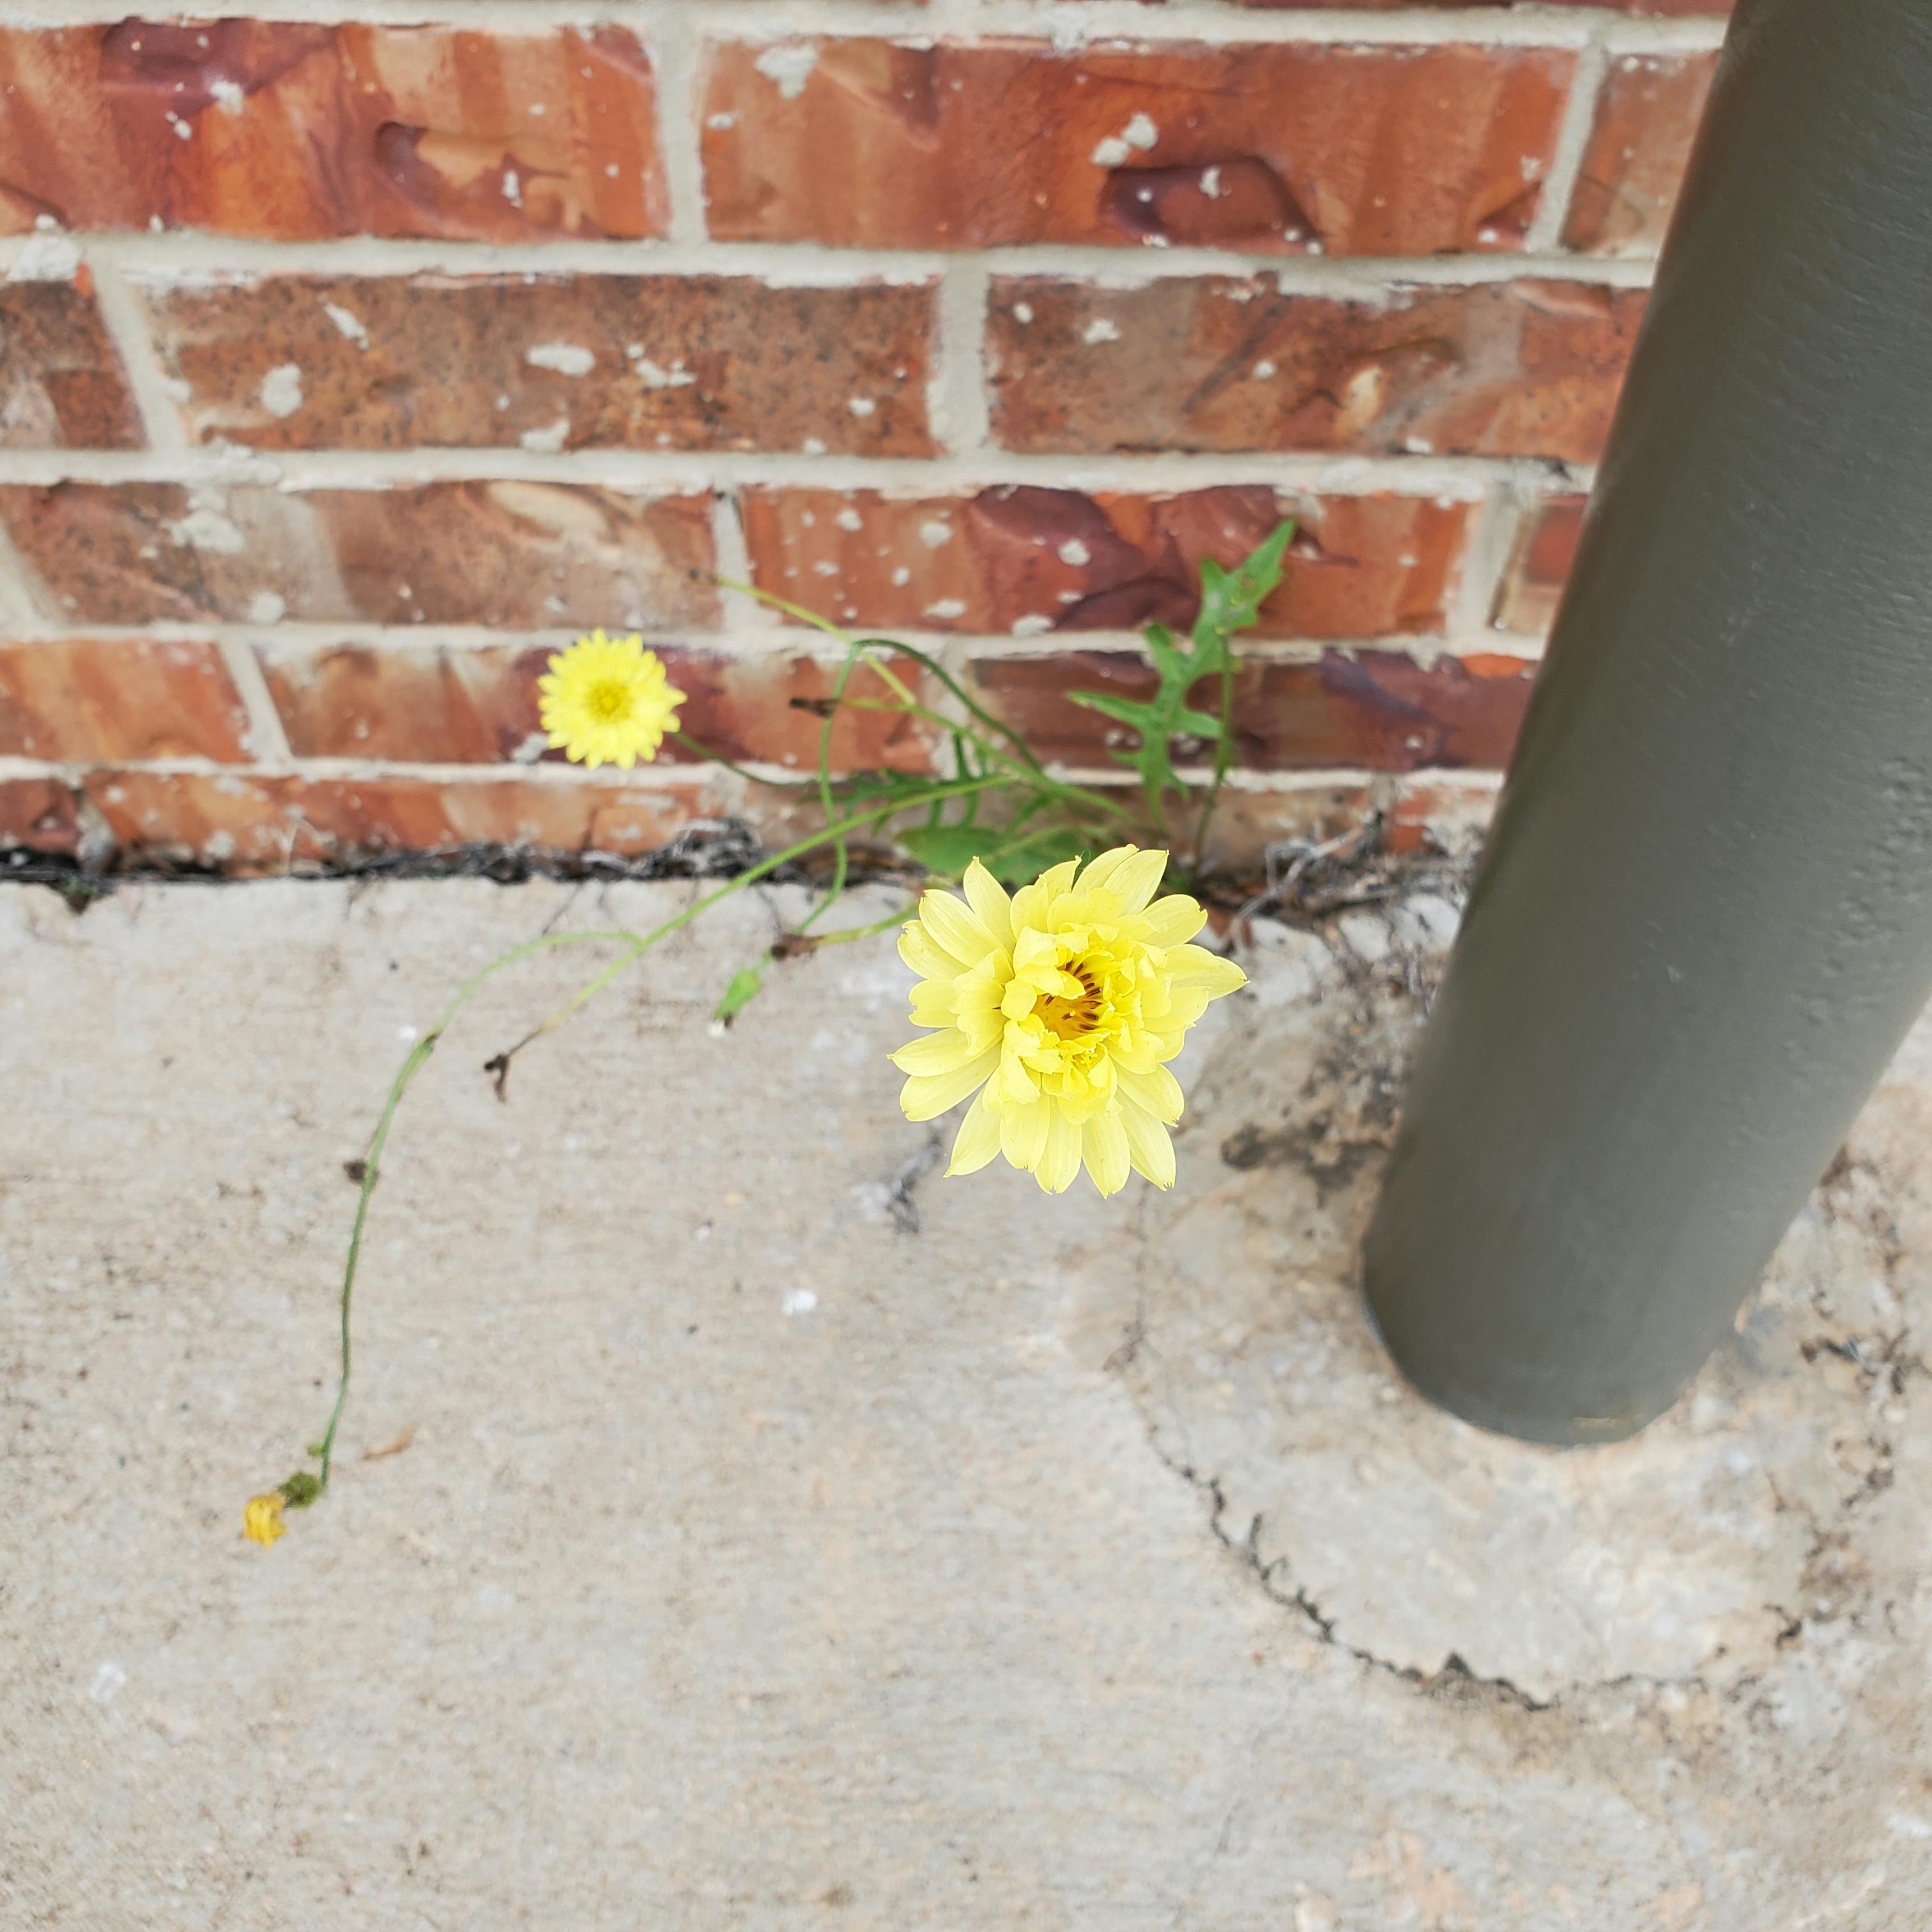 Photo of a green plant with yellow flowers growing out of a crack between concrete pavement and a brick wall.